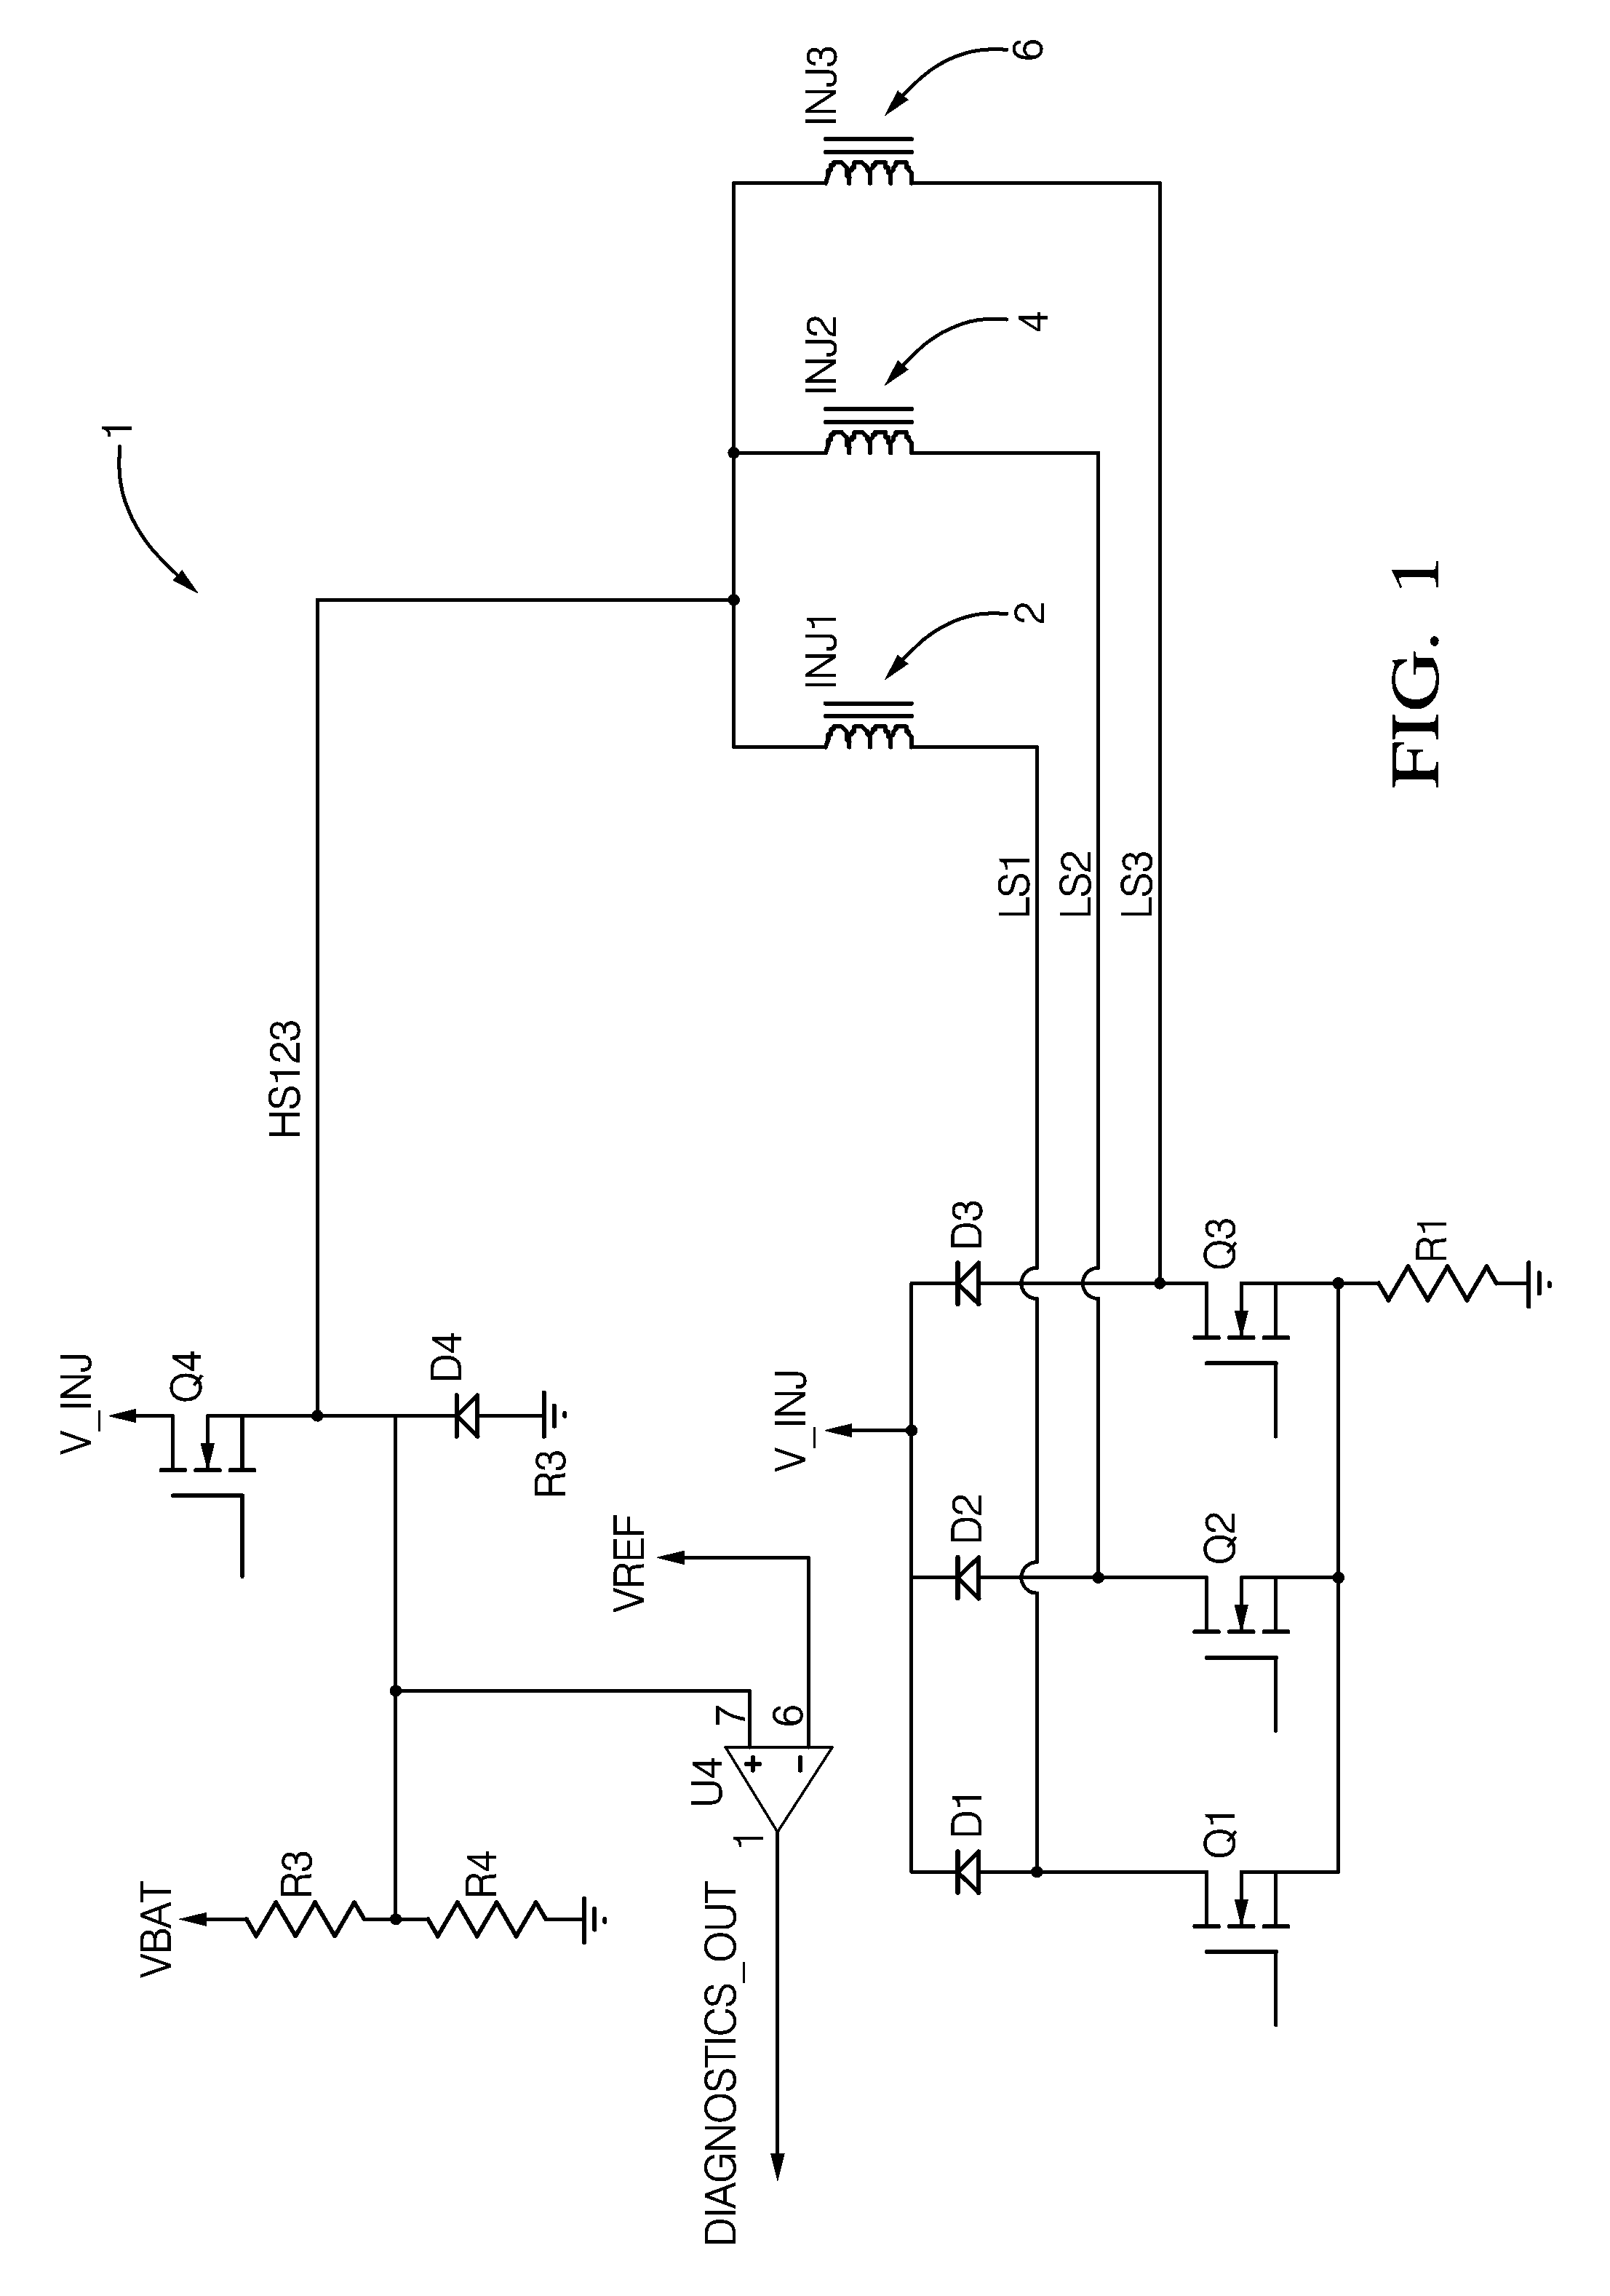 Fuel injector communication system